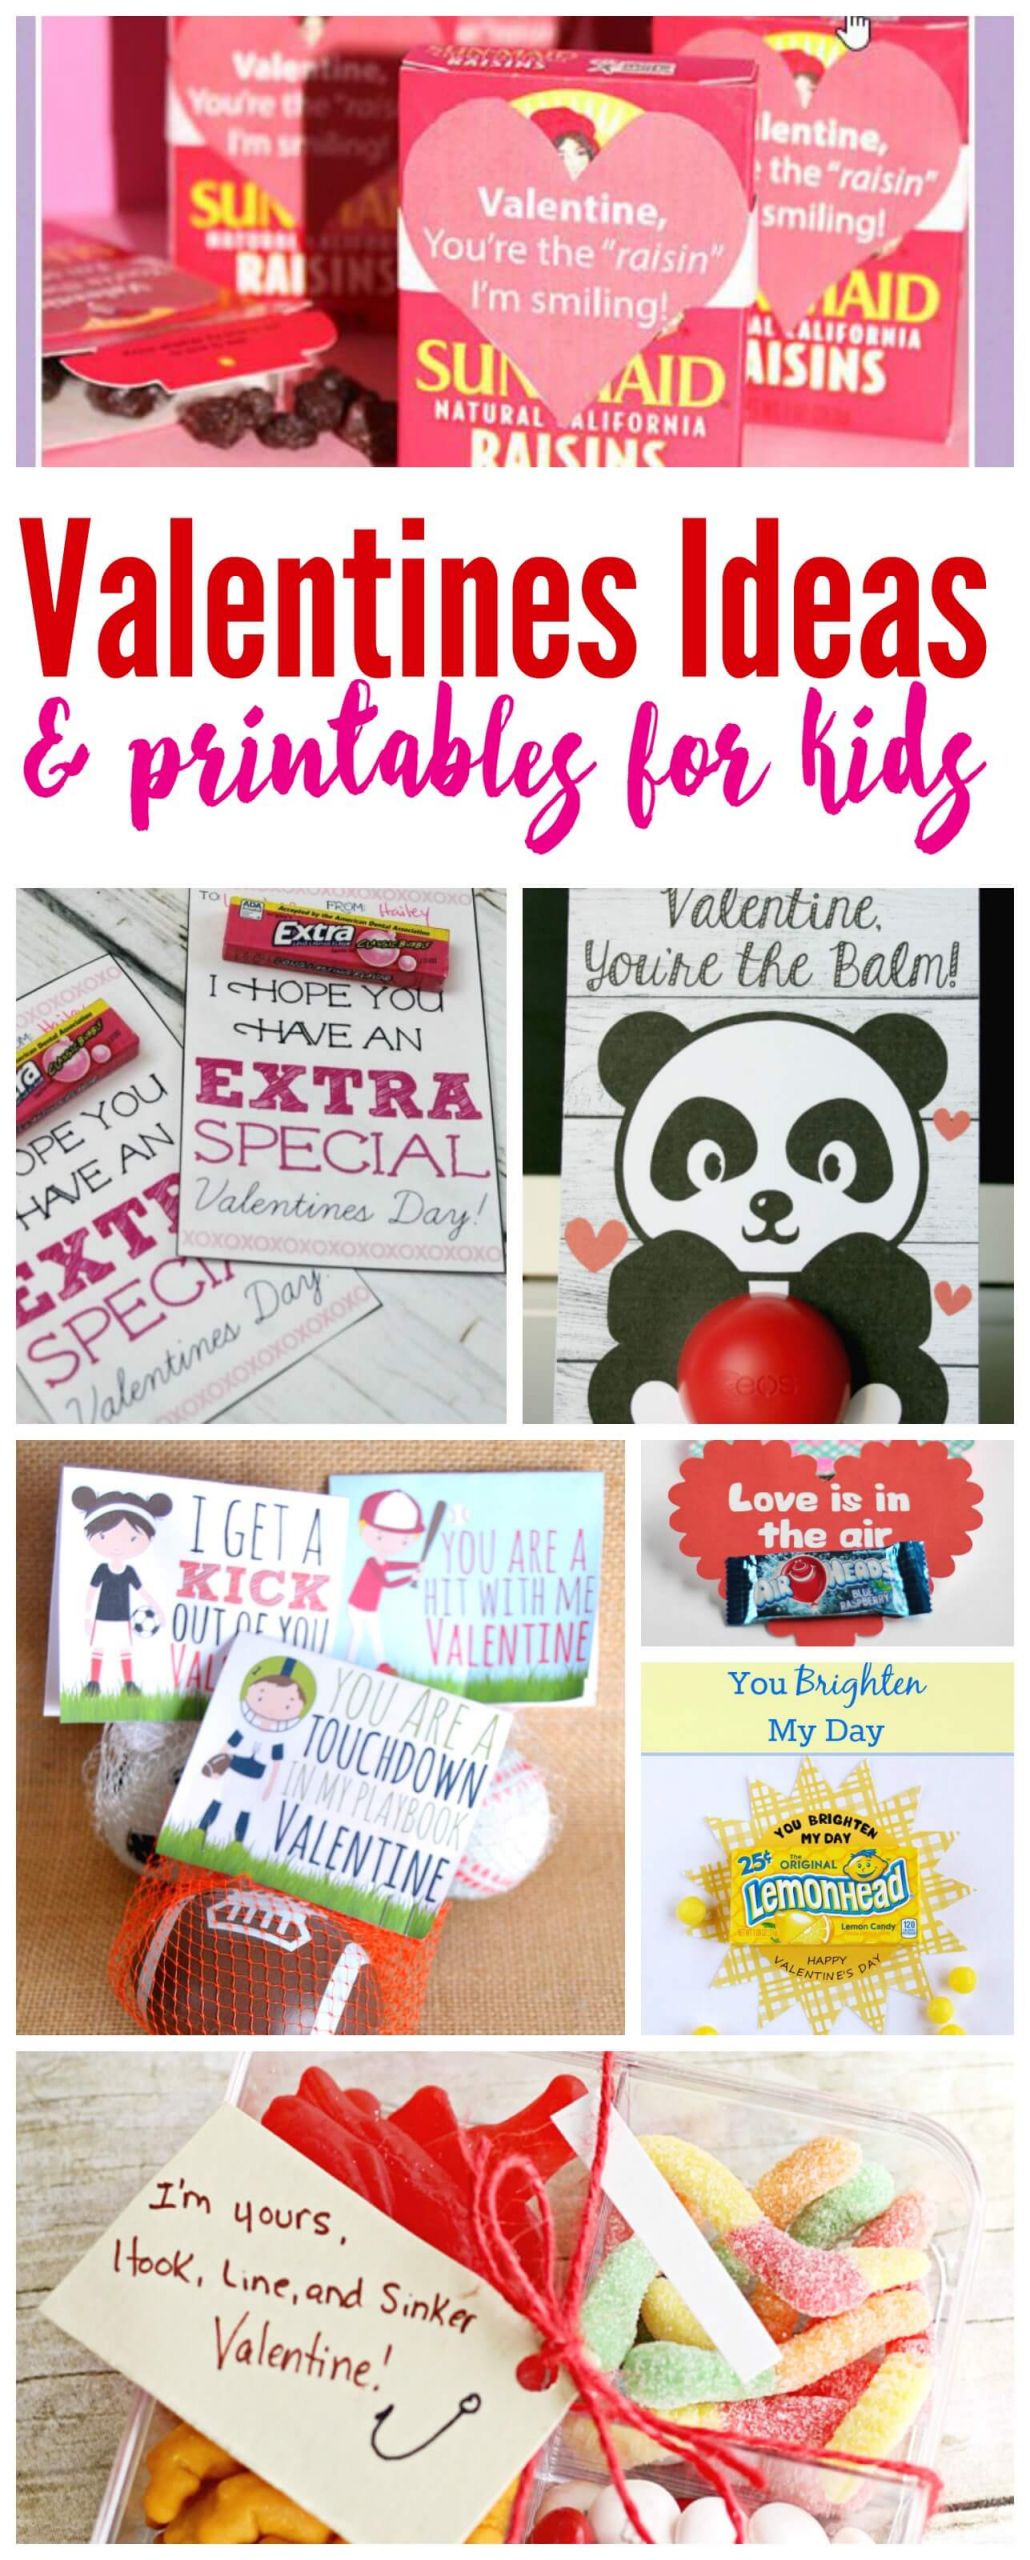 Classroom Valentine Gift Ideas
 Easy Class Valentines Ideas for Kids